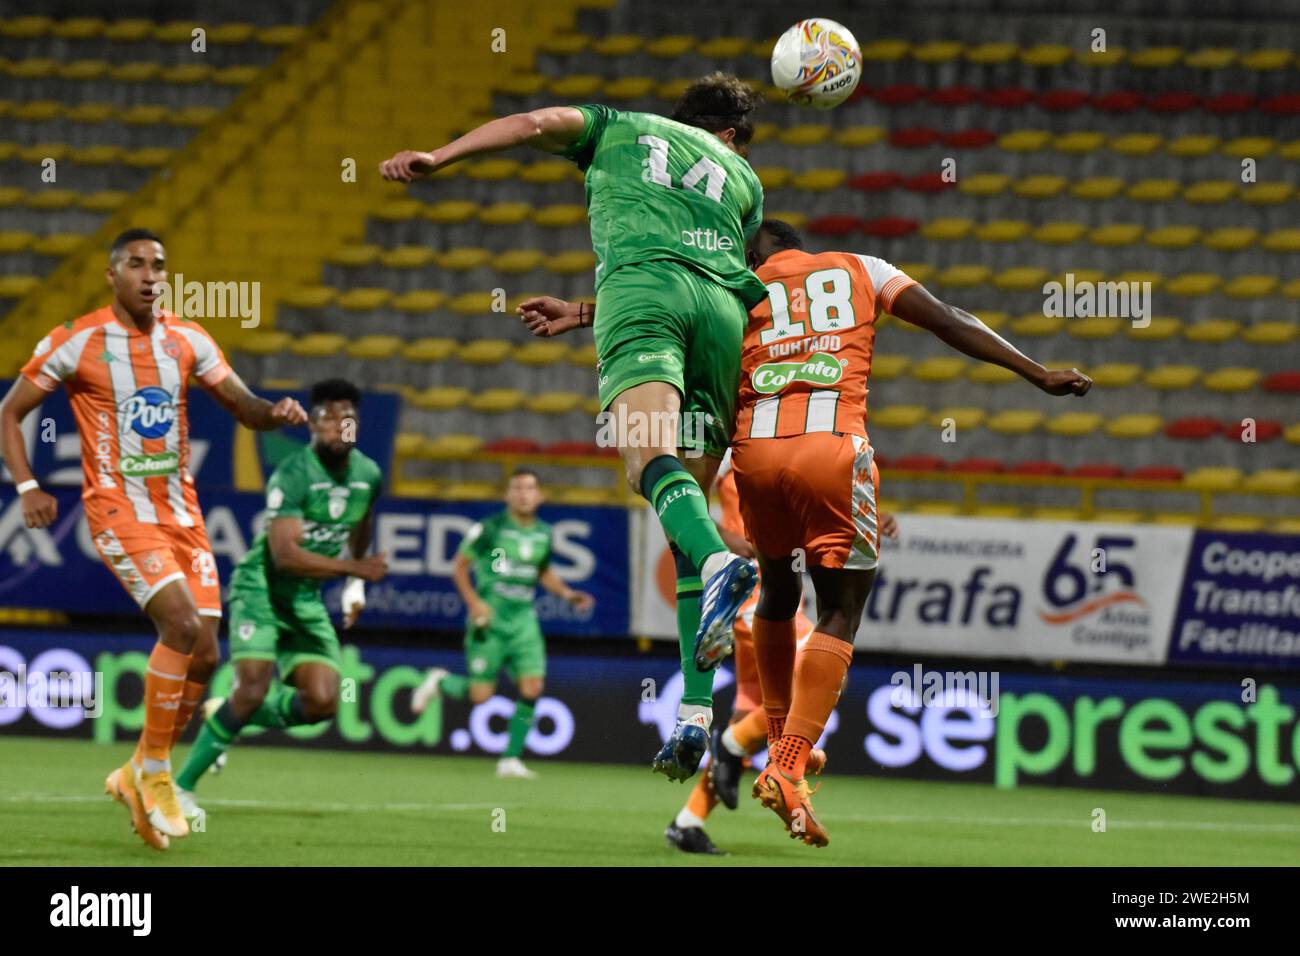 Bogota, Colombia. 22nd Jan, 2024. Equidad's Felipe Acosta wins a fight for a headshot against Envigado's William Hurtado during the Equidad vs Envigado match for the Betplay Dimayor league in the Techo stadium in Bogota, Colombia, January 22, 2024. Photo by: Cristian Bayona/Long Visual Press Credit: Long Visual Press/Alamy Live News Stock Photo